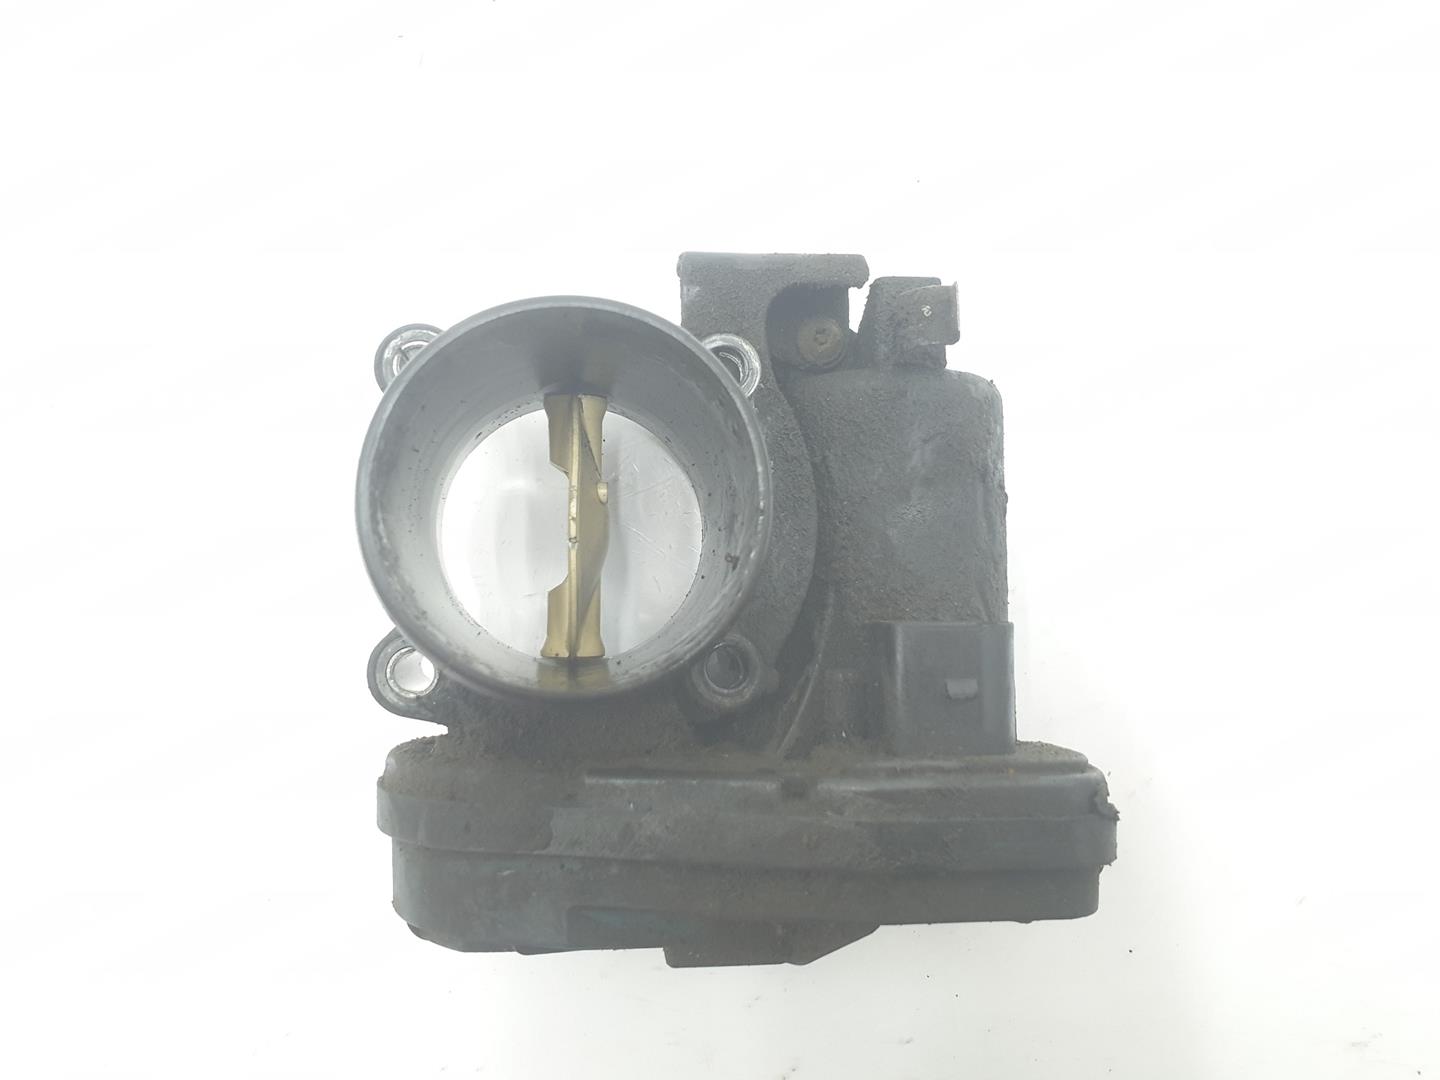 LAND ROVER Range Rover Sport 1 generation (2005-2013) Throttle Body 368DT, 6H3Q6006AE, 1111AA 24194171